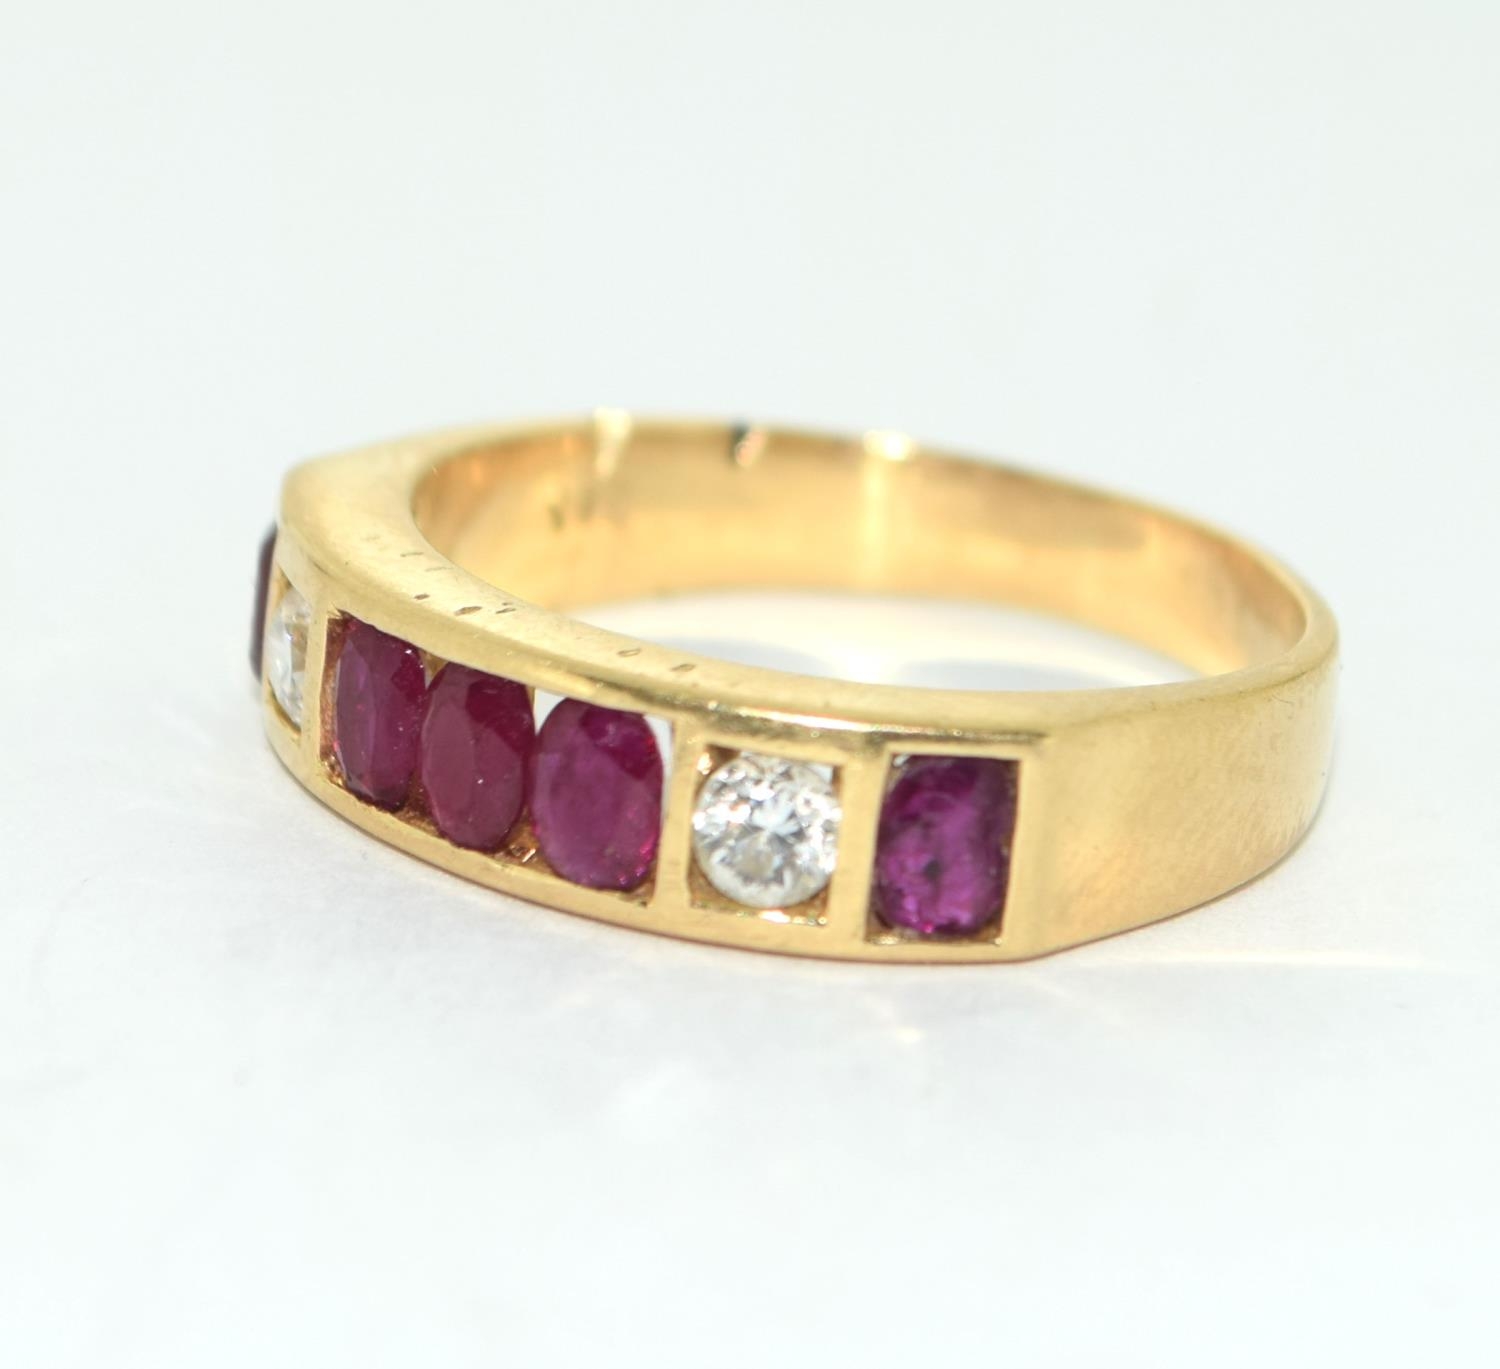 Ruby /diamond 18ct gold ring 5.7g size R - Image 3 of 5